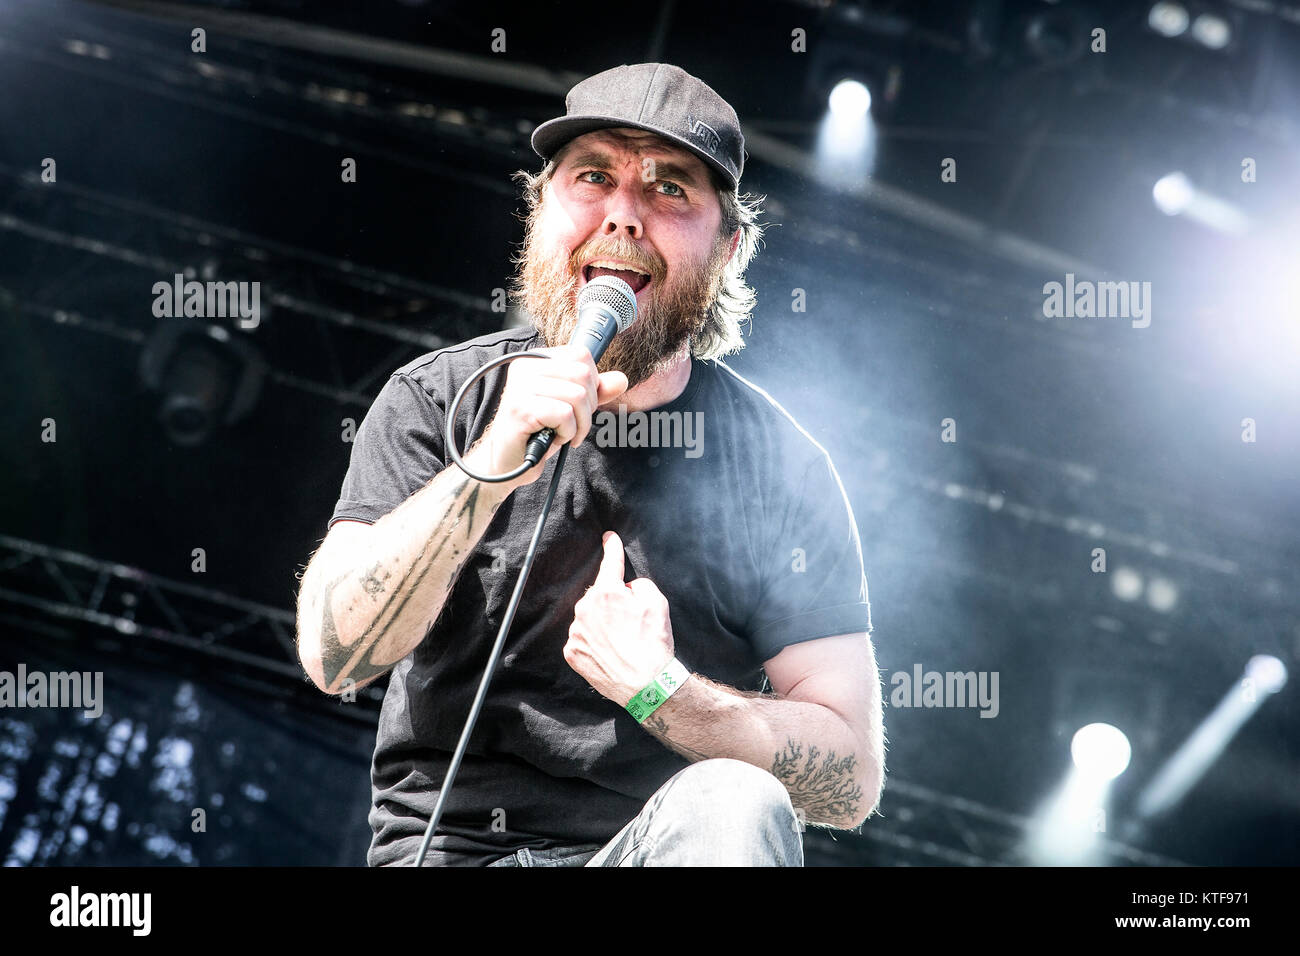 The Norwegian heavy metal band Dunderbeist performs a live concert at the Norwegian music festival Tons of Rock 2015. Here vocalist Torgrim Torve is seen live on stage. Norway, 20/06 2015. Stock Photo